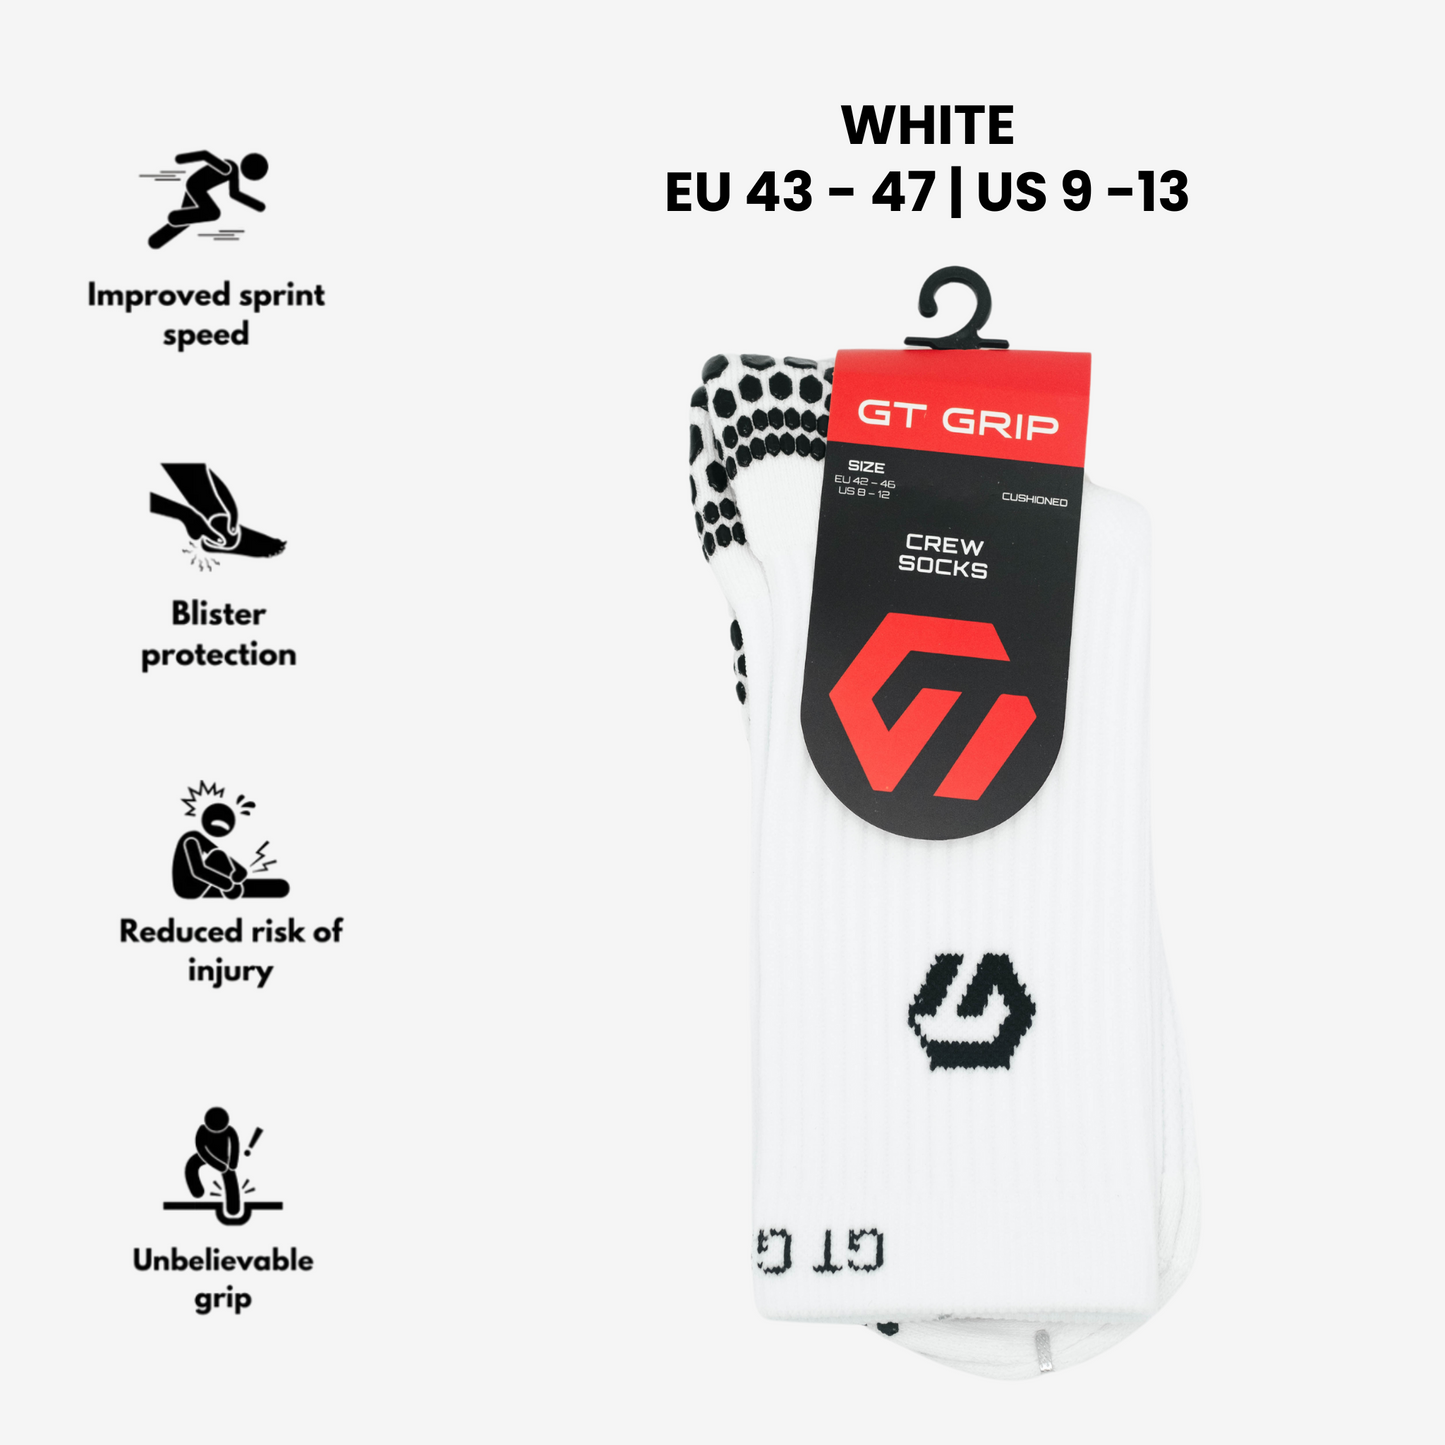 GT GRIP White Performance Socks - Grip Socks - Size EU 43-47 | US 9-13 for Optimal Stability, Anti-Blister Protection, and Exceptional Traction